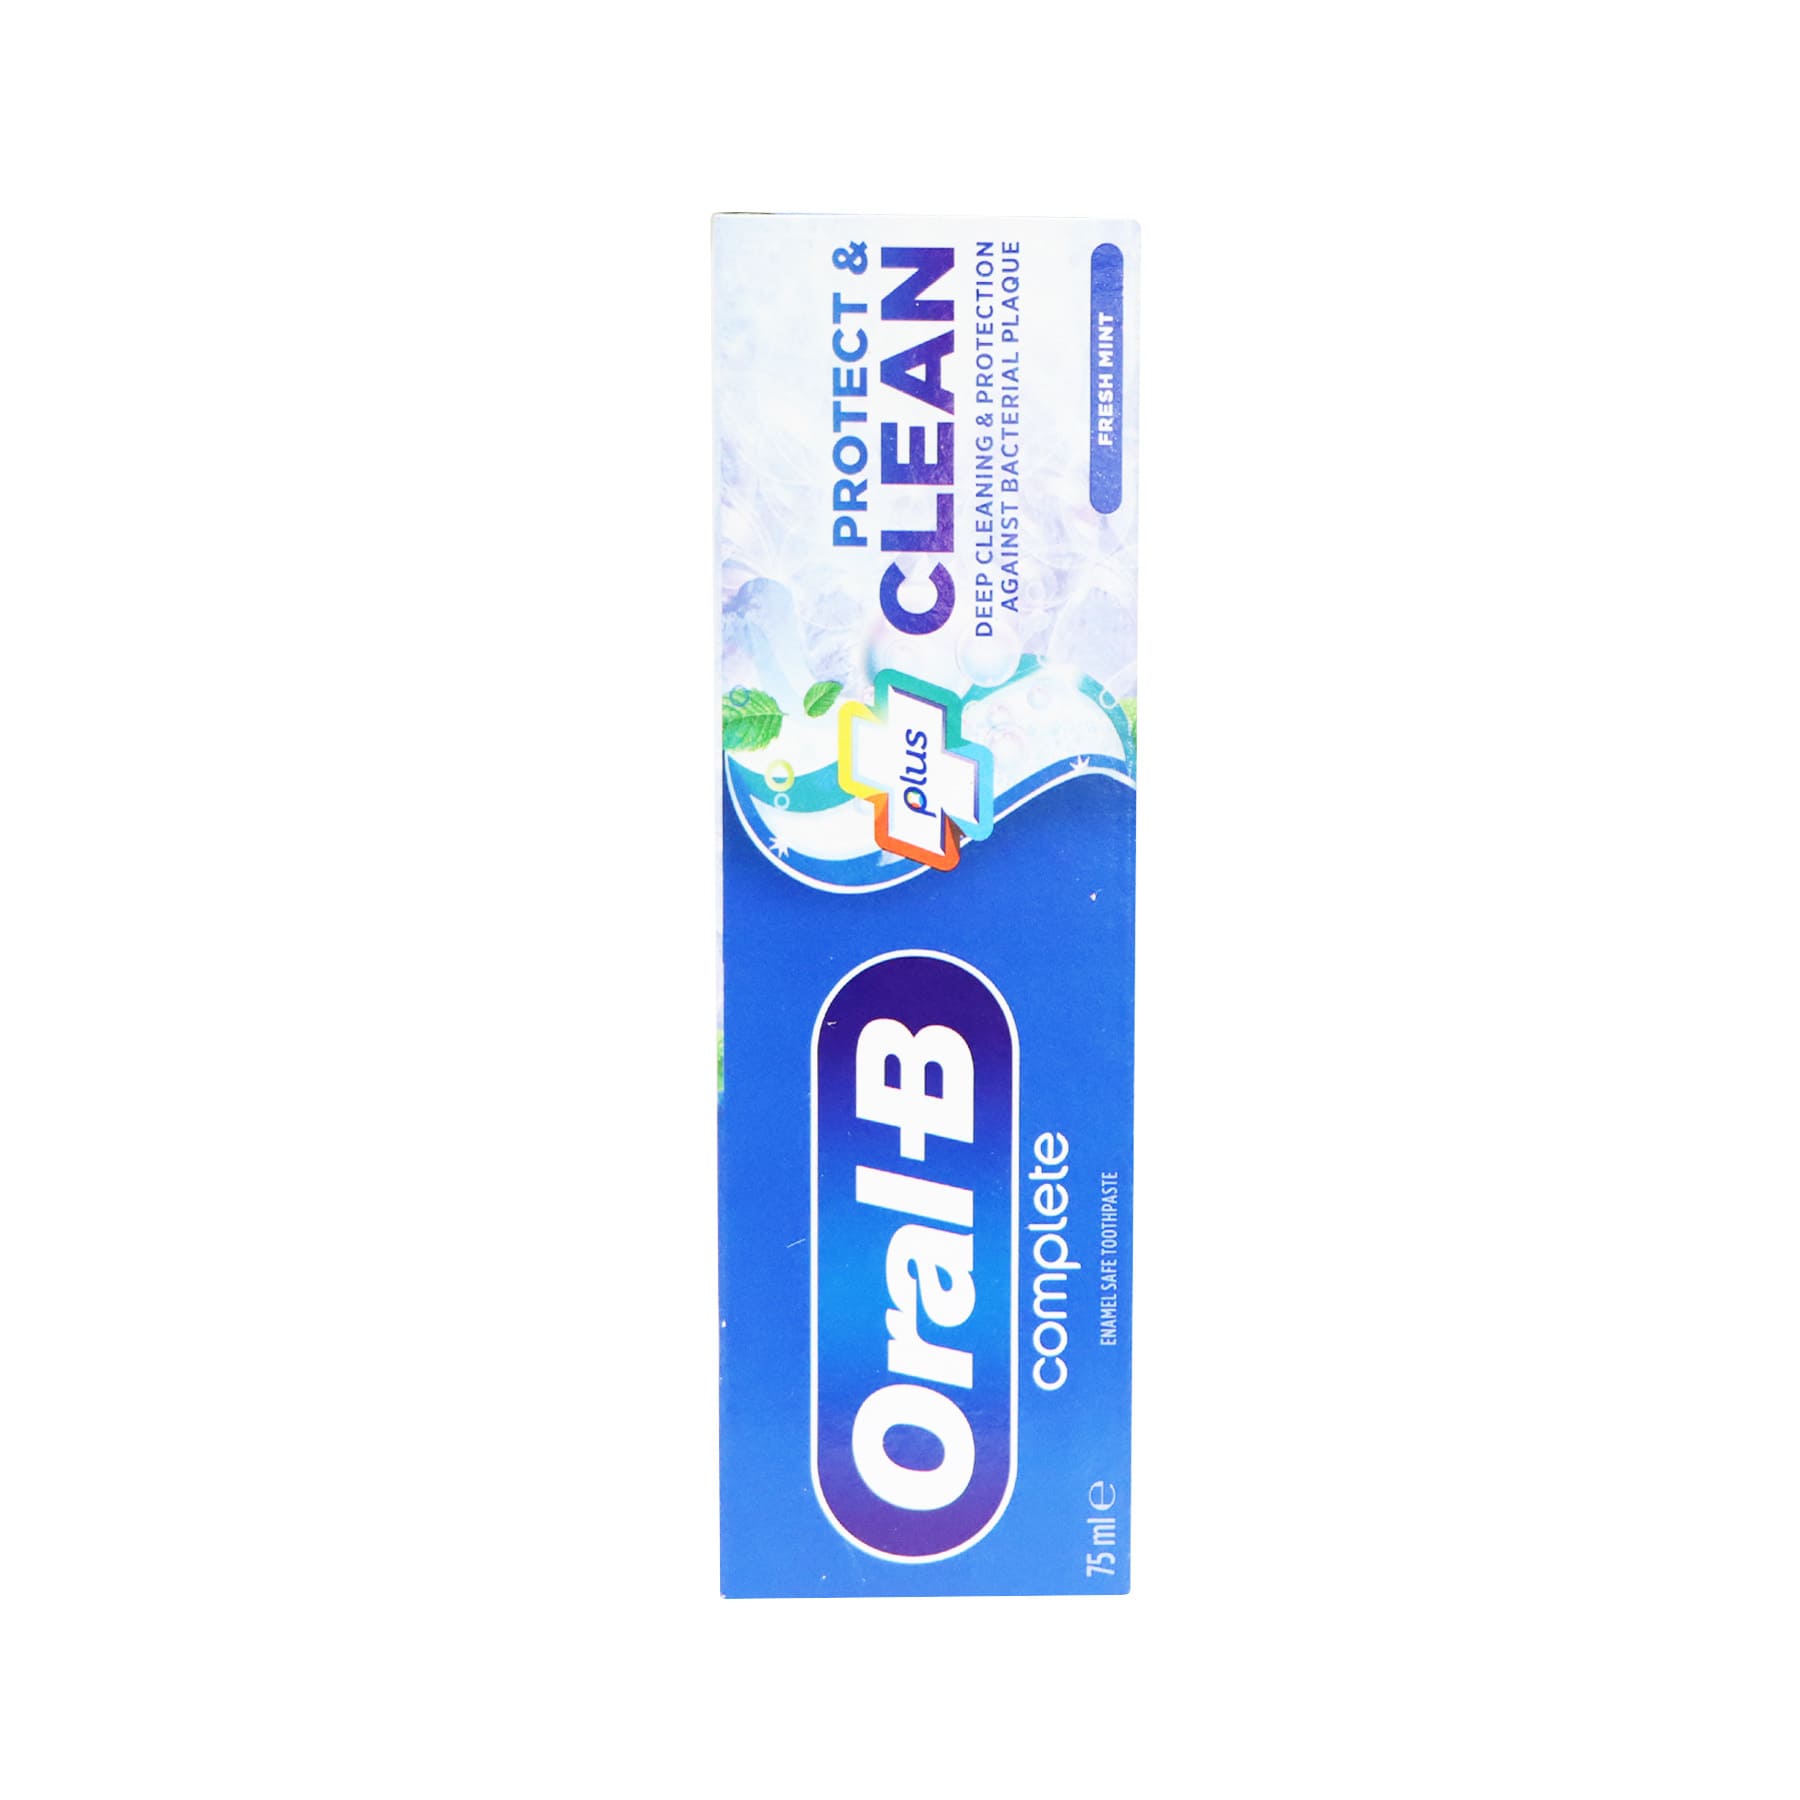 Oral-B Complete Plus Protect & Clean Toothpaste 75ml x 2